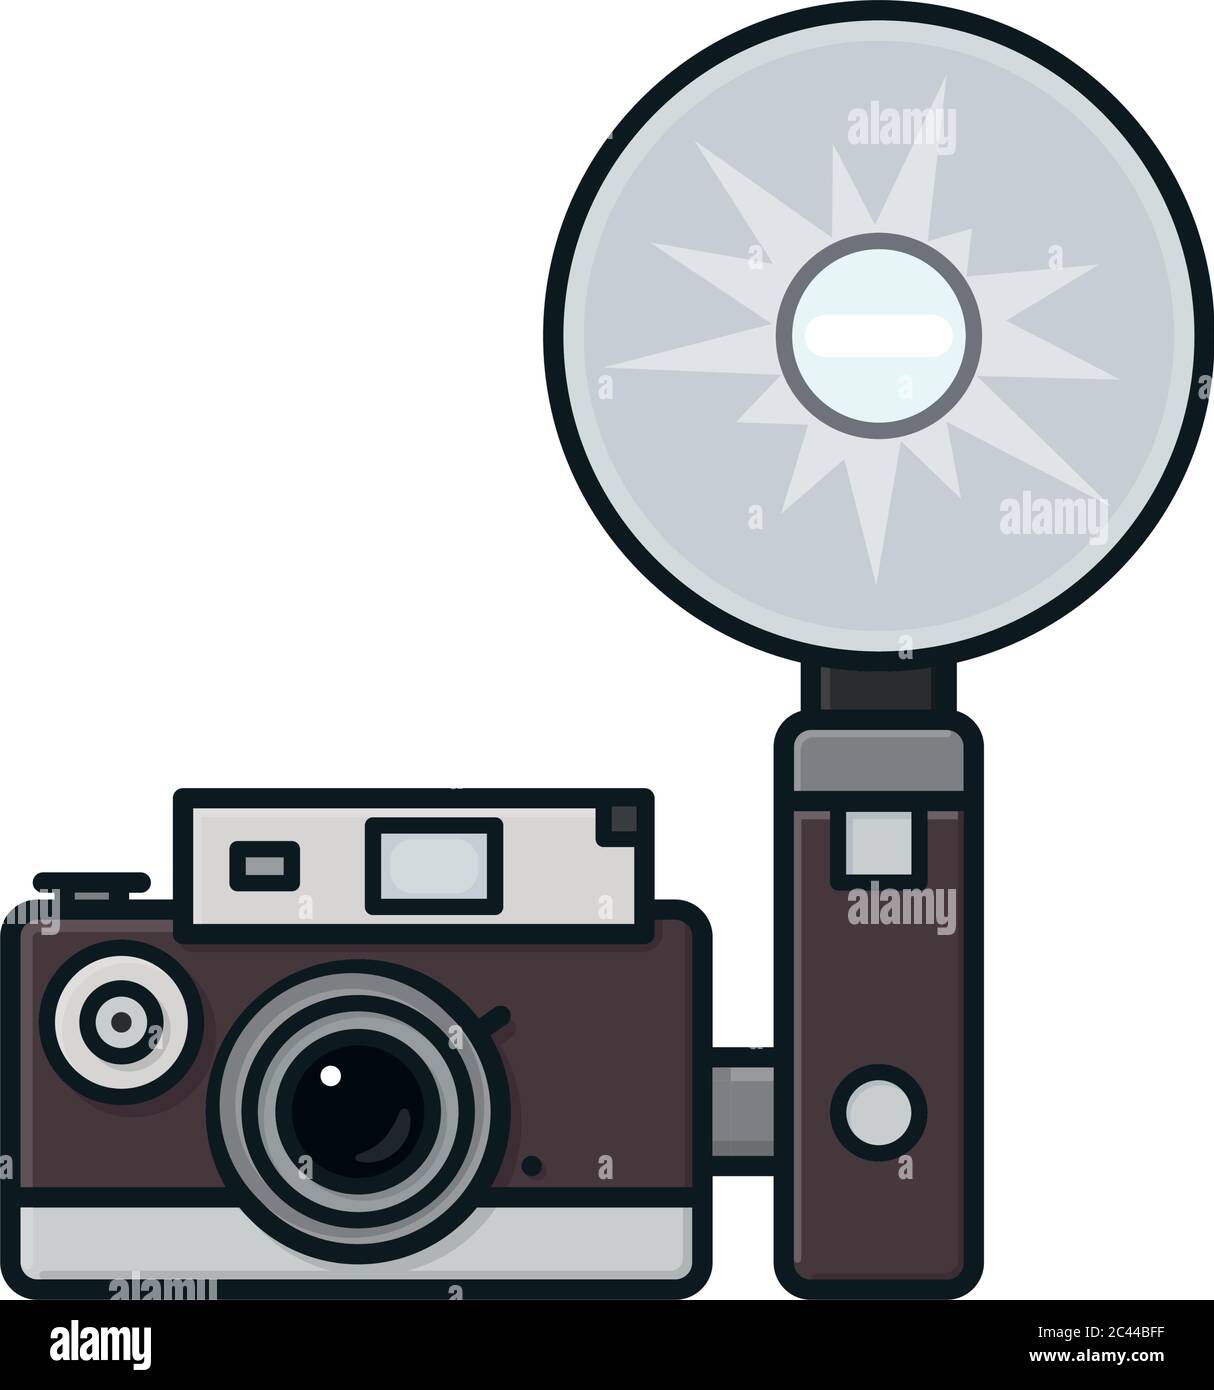 Flashing camera Stock Vector Images - Alamy